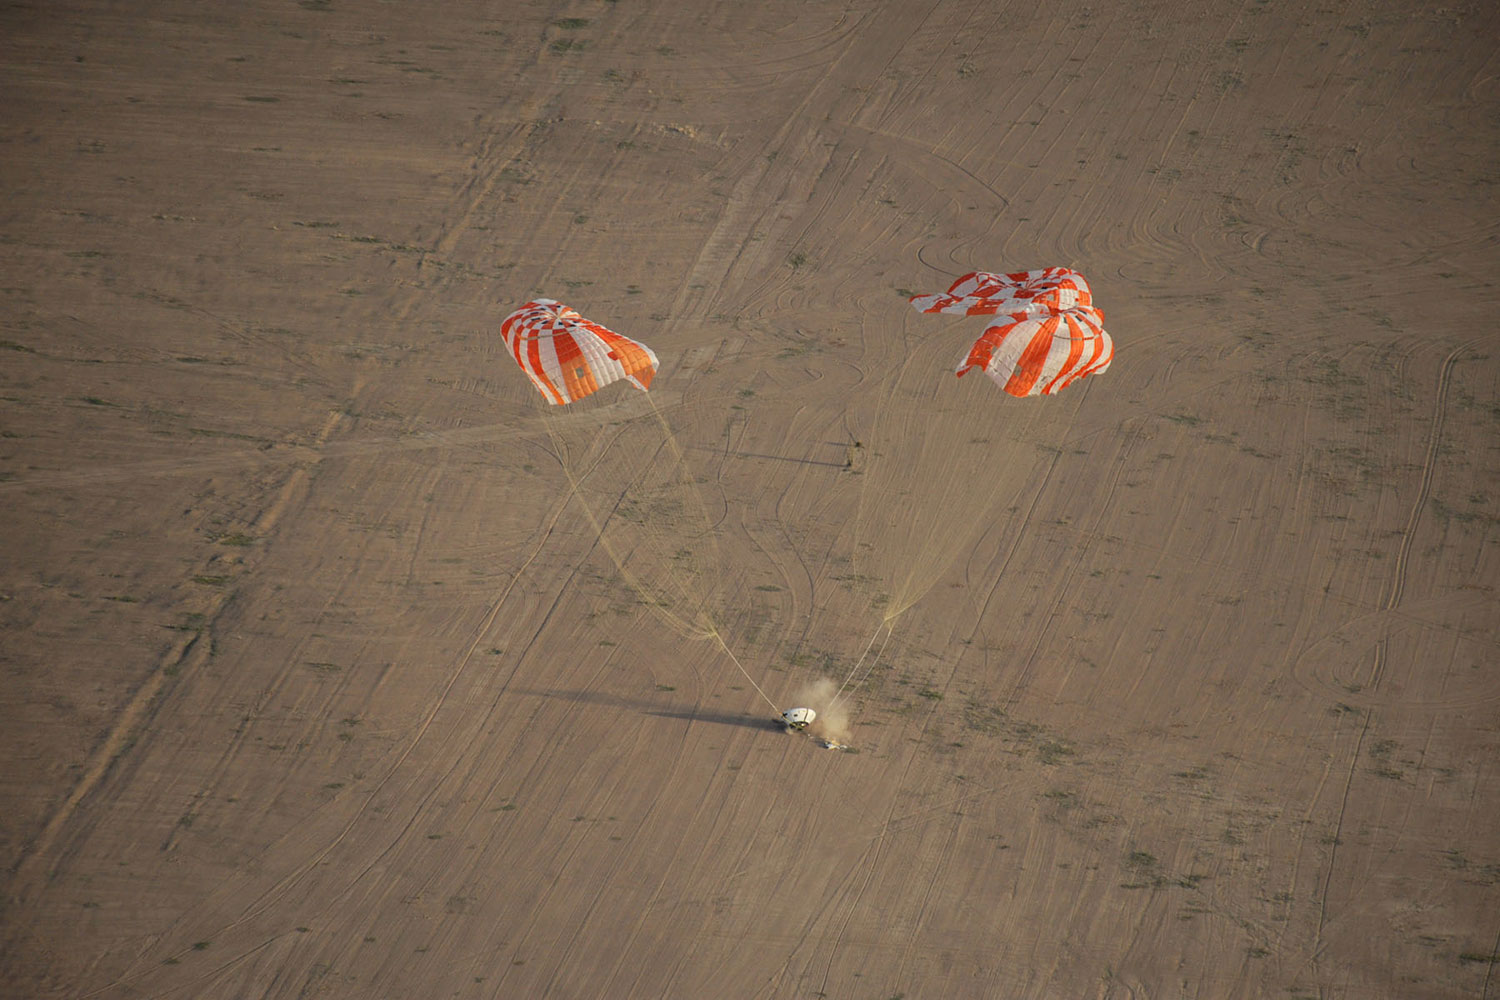 A test model of the Orion spacecraft with its parachutes was dropped high above the the Arizona desert on Feb. 29, 2012. This particular drop test—the latest of a series—studied the stability of the wake left by the Orion as it descended.